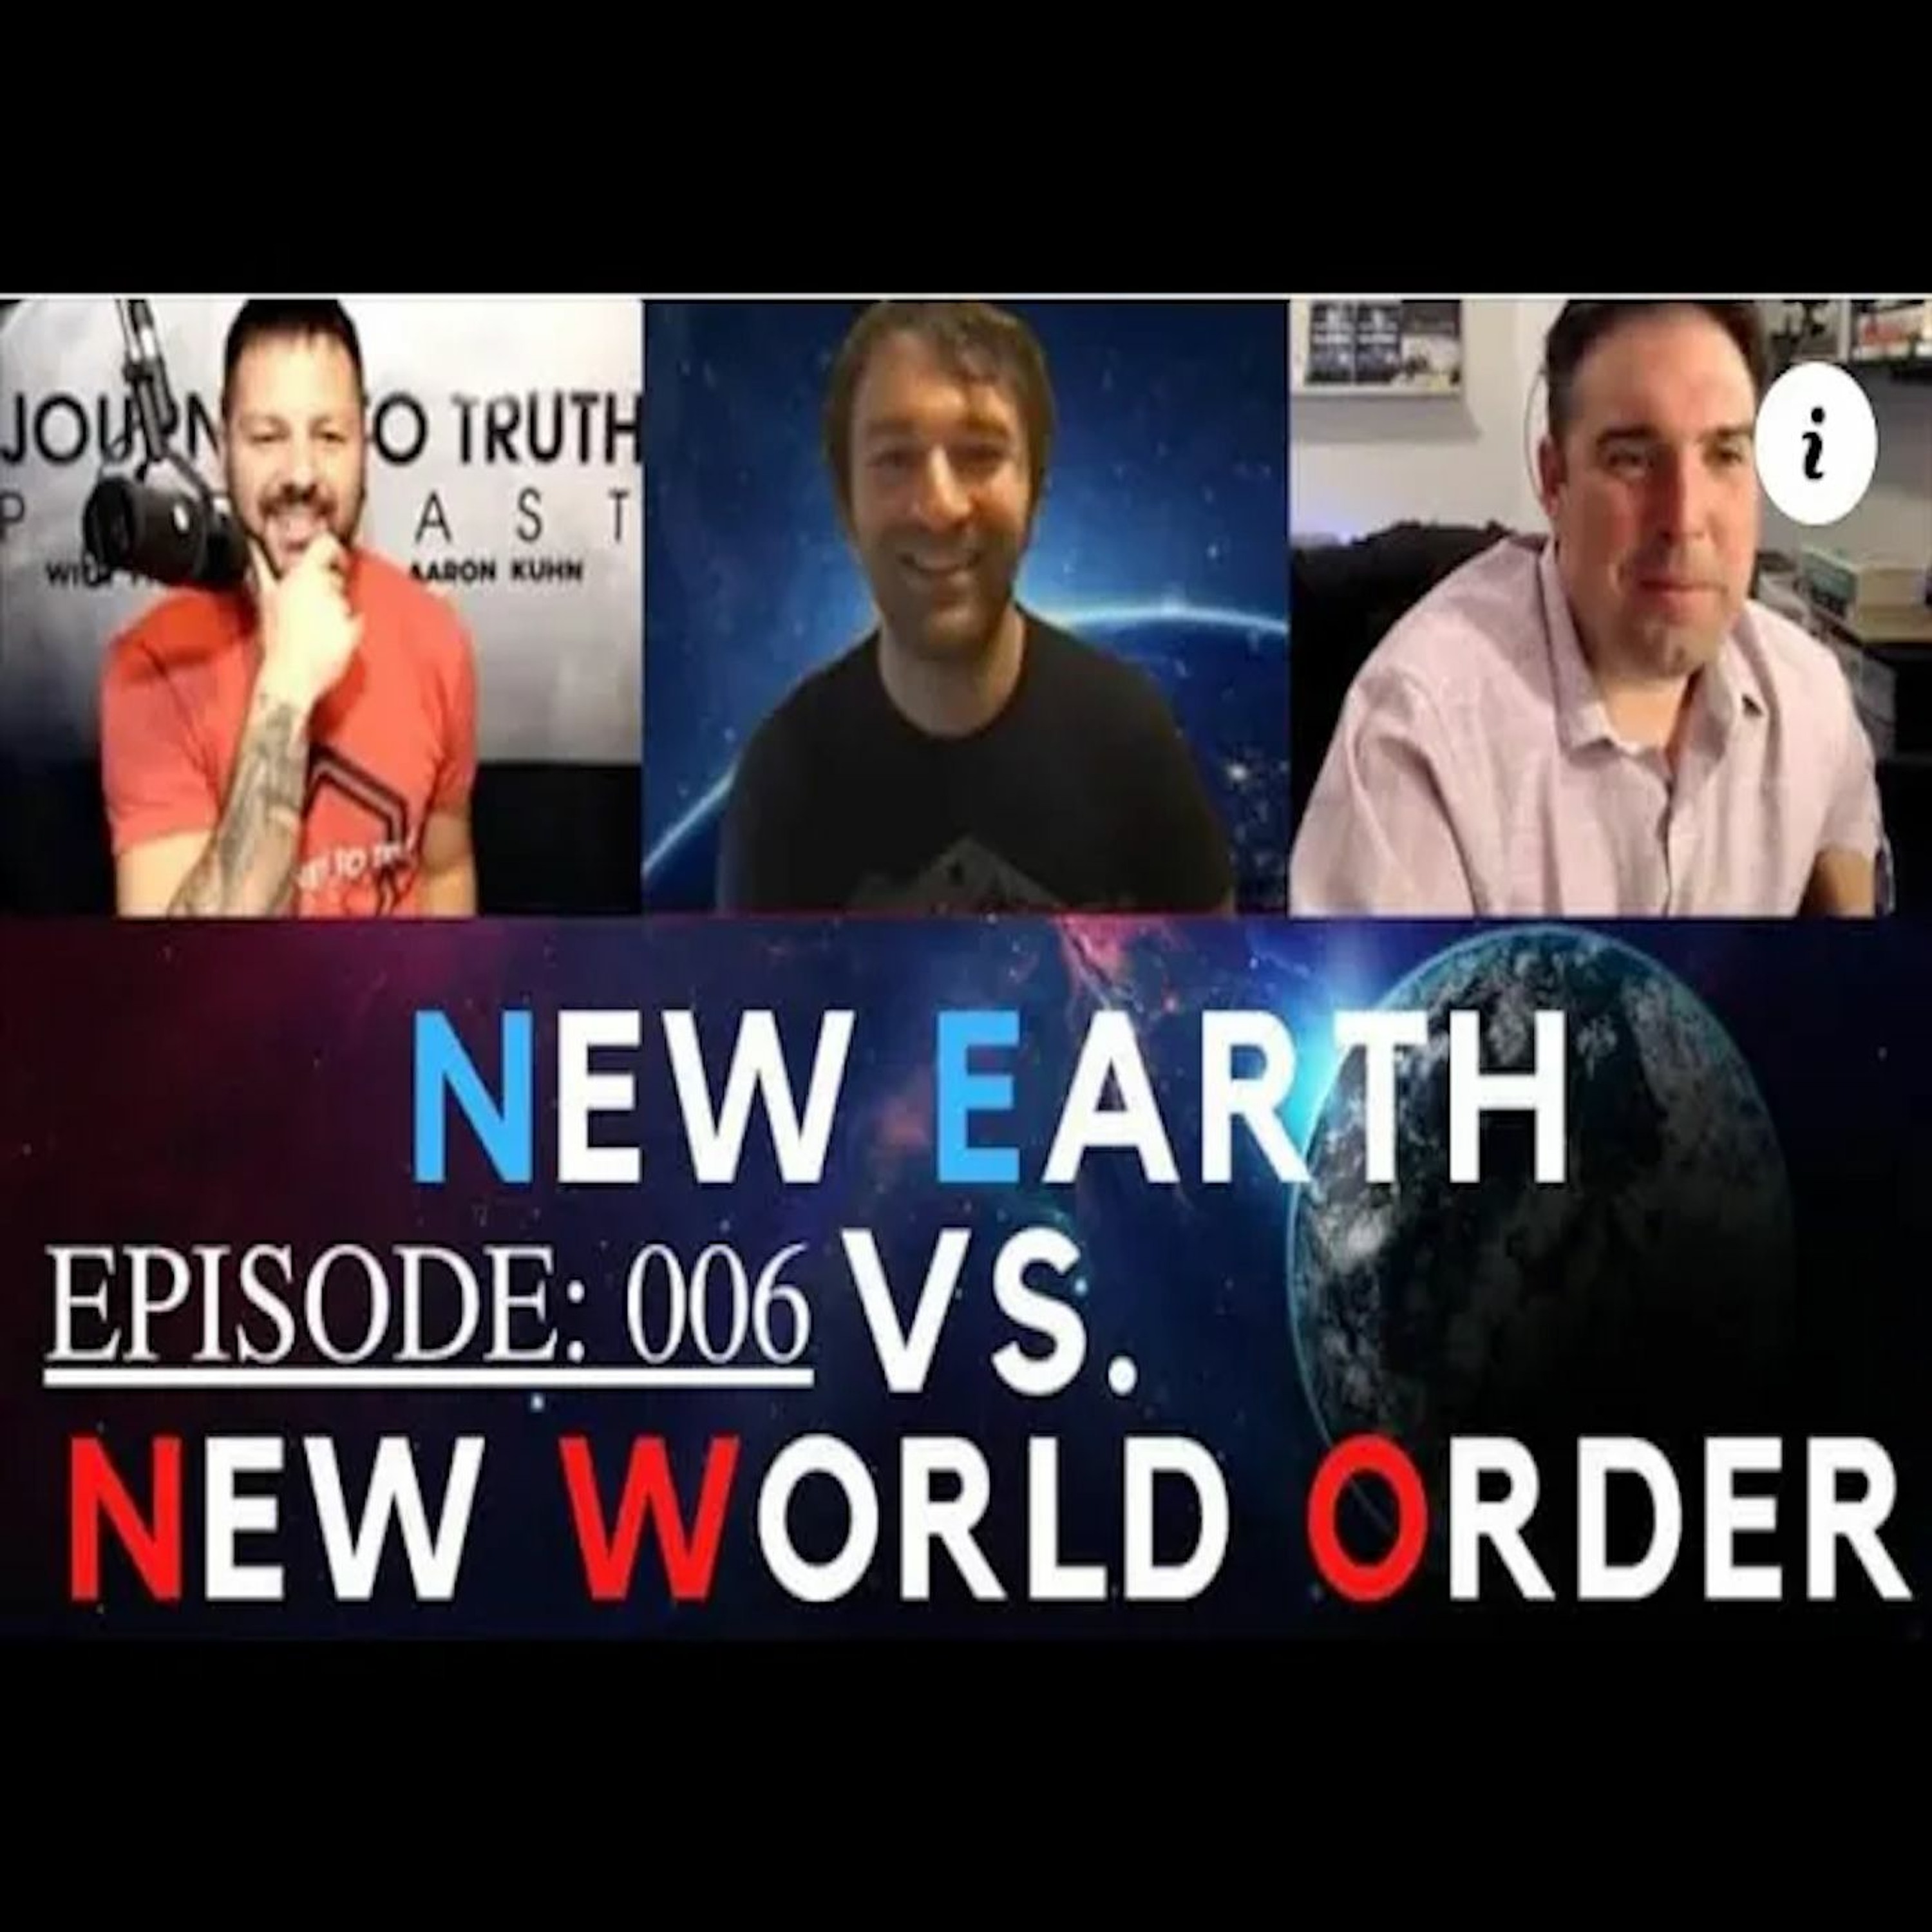 New Earth Vs New World Order With Journey To Truth 2021